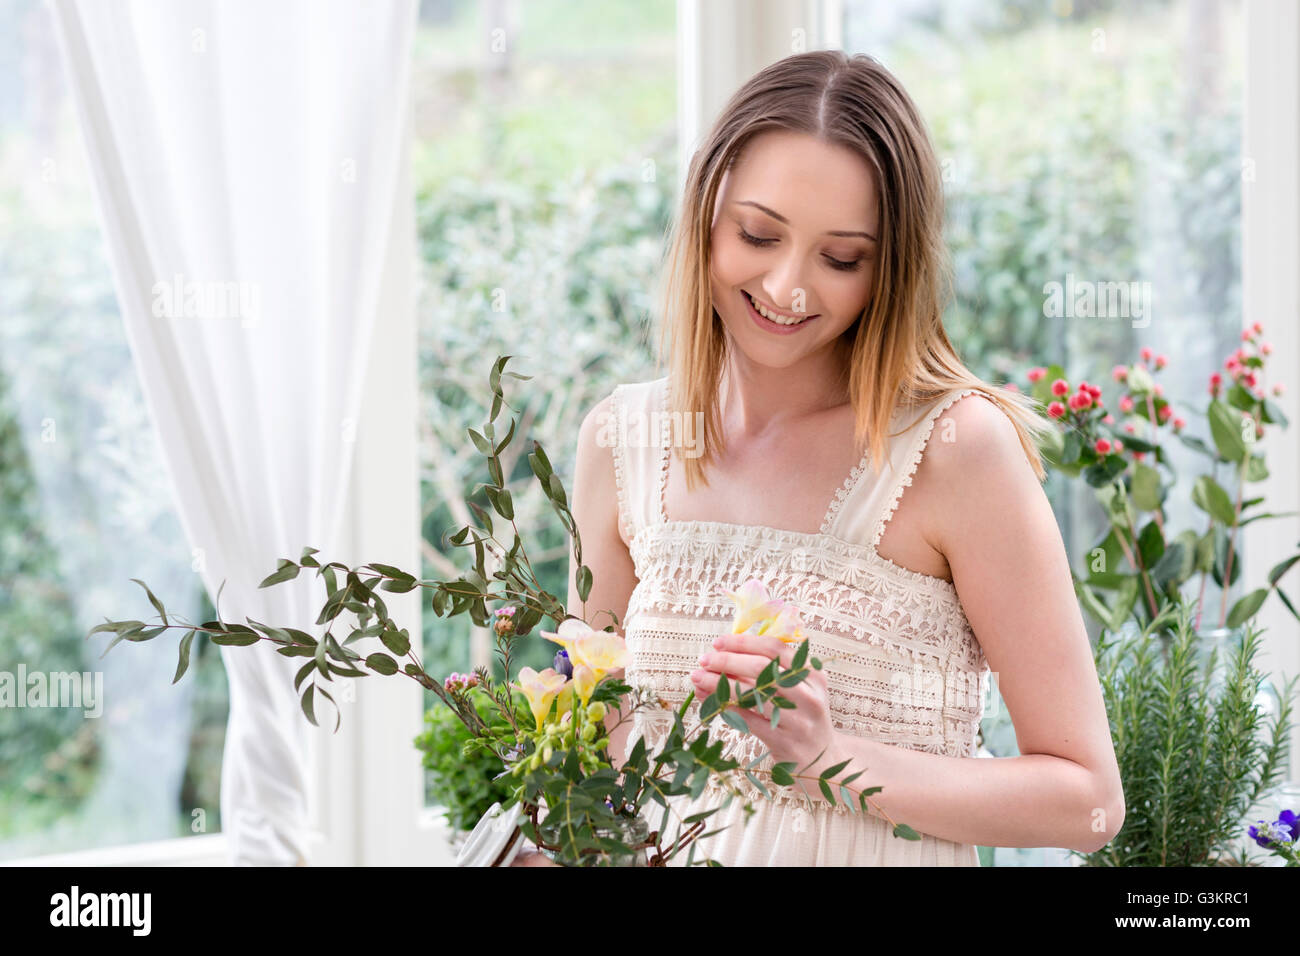 Woman arranging flowers looking down smiling Stock Photo